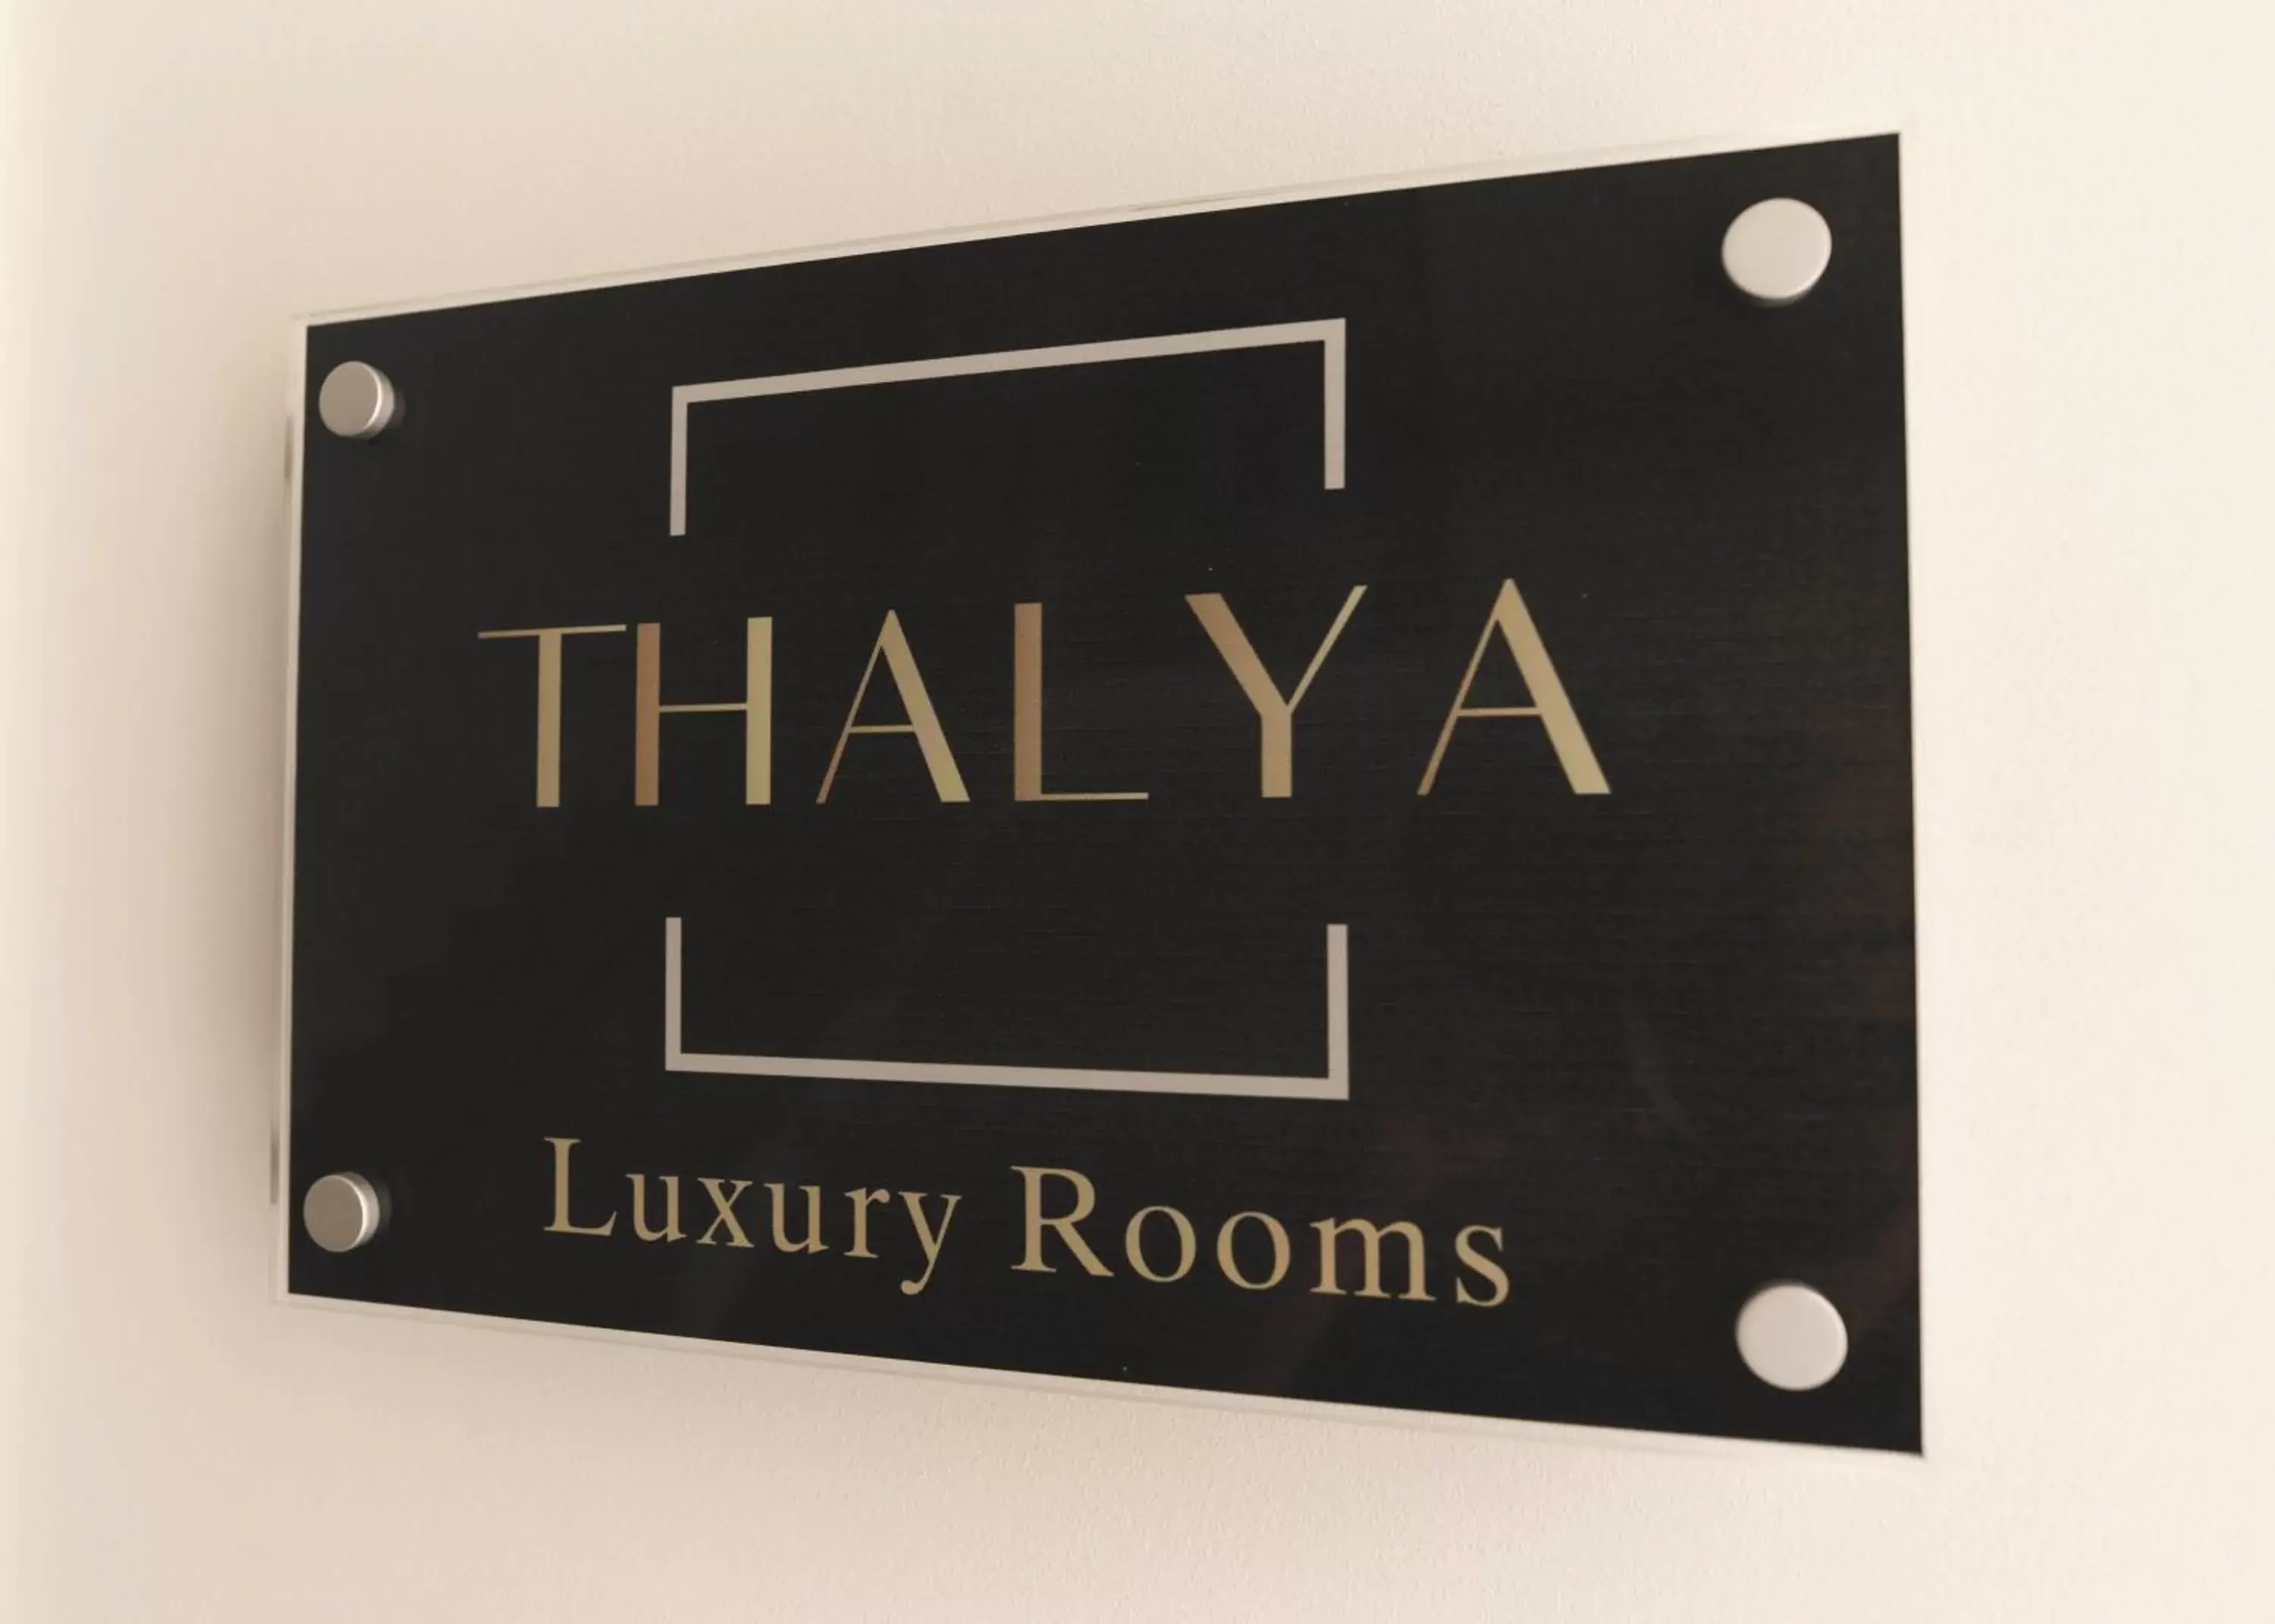 Property building in Thalya Luxury Rooms